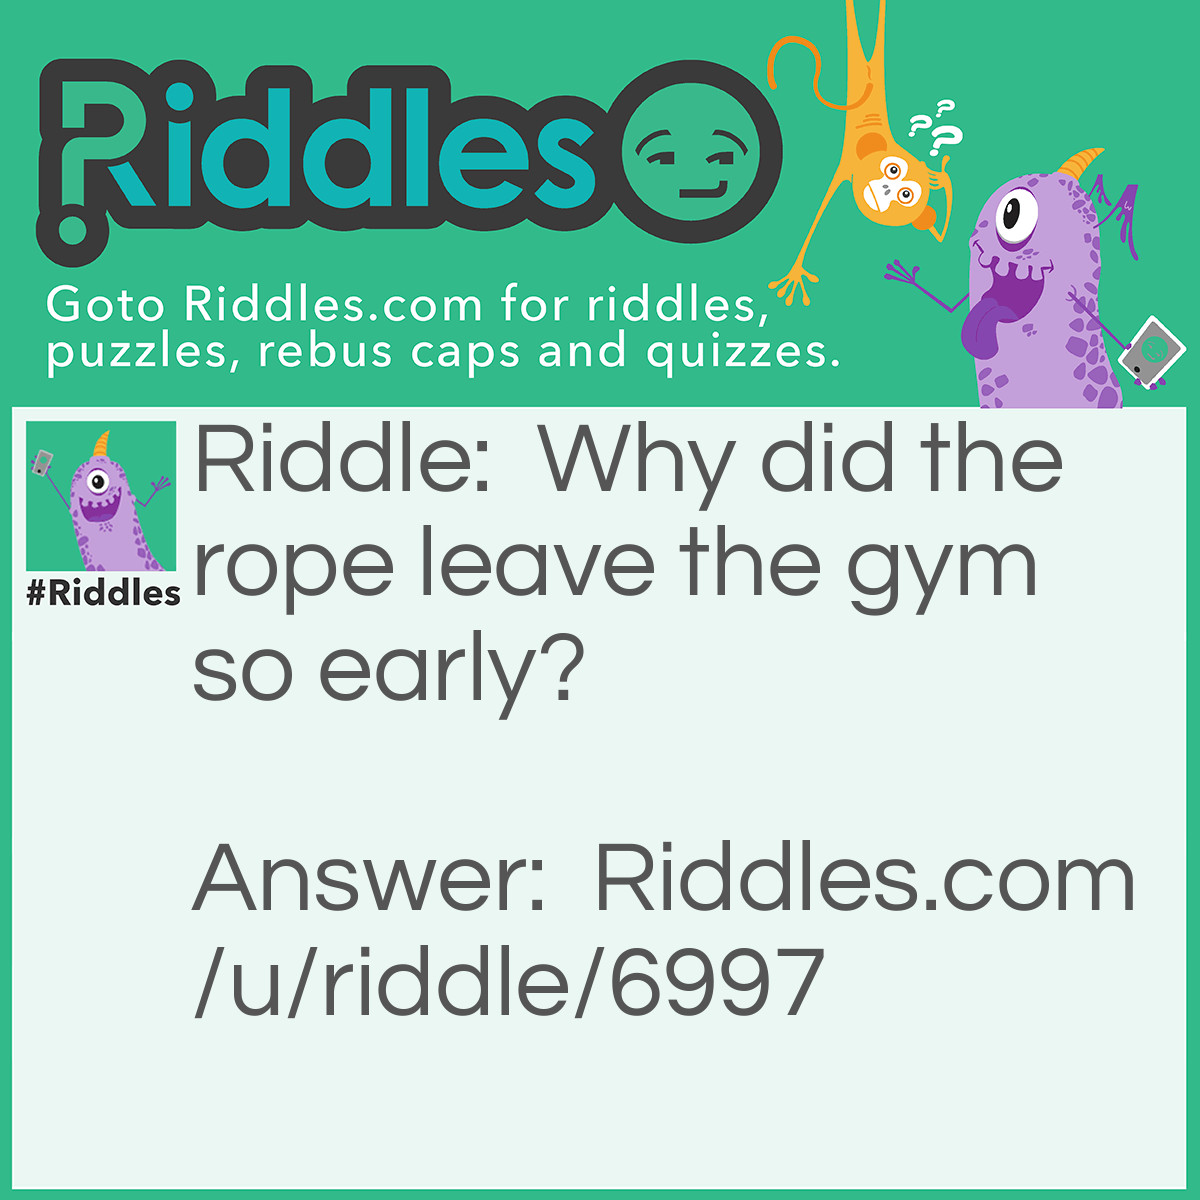 Riddle: Why did the rope leave the gym so early? Answer: It wanted to "skip" class.